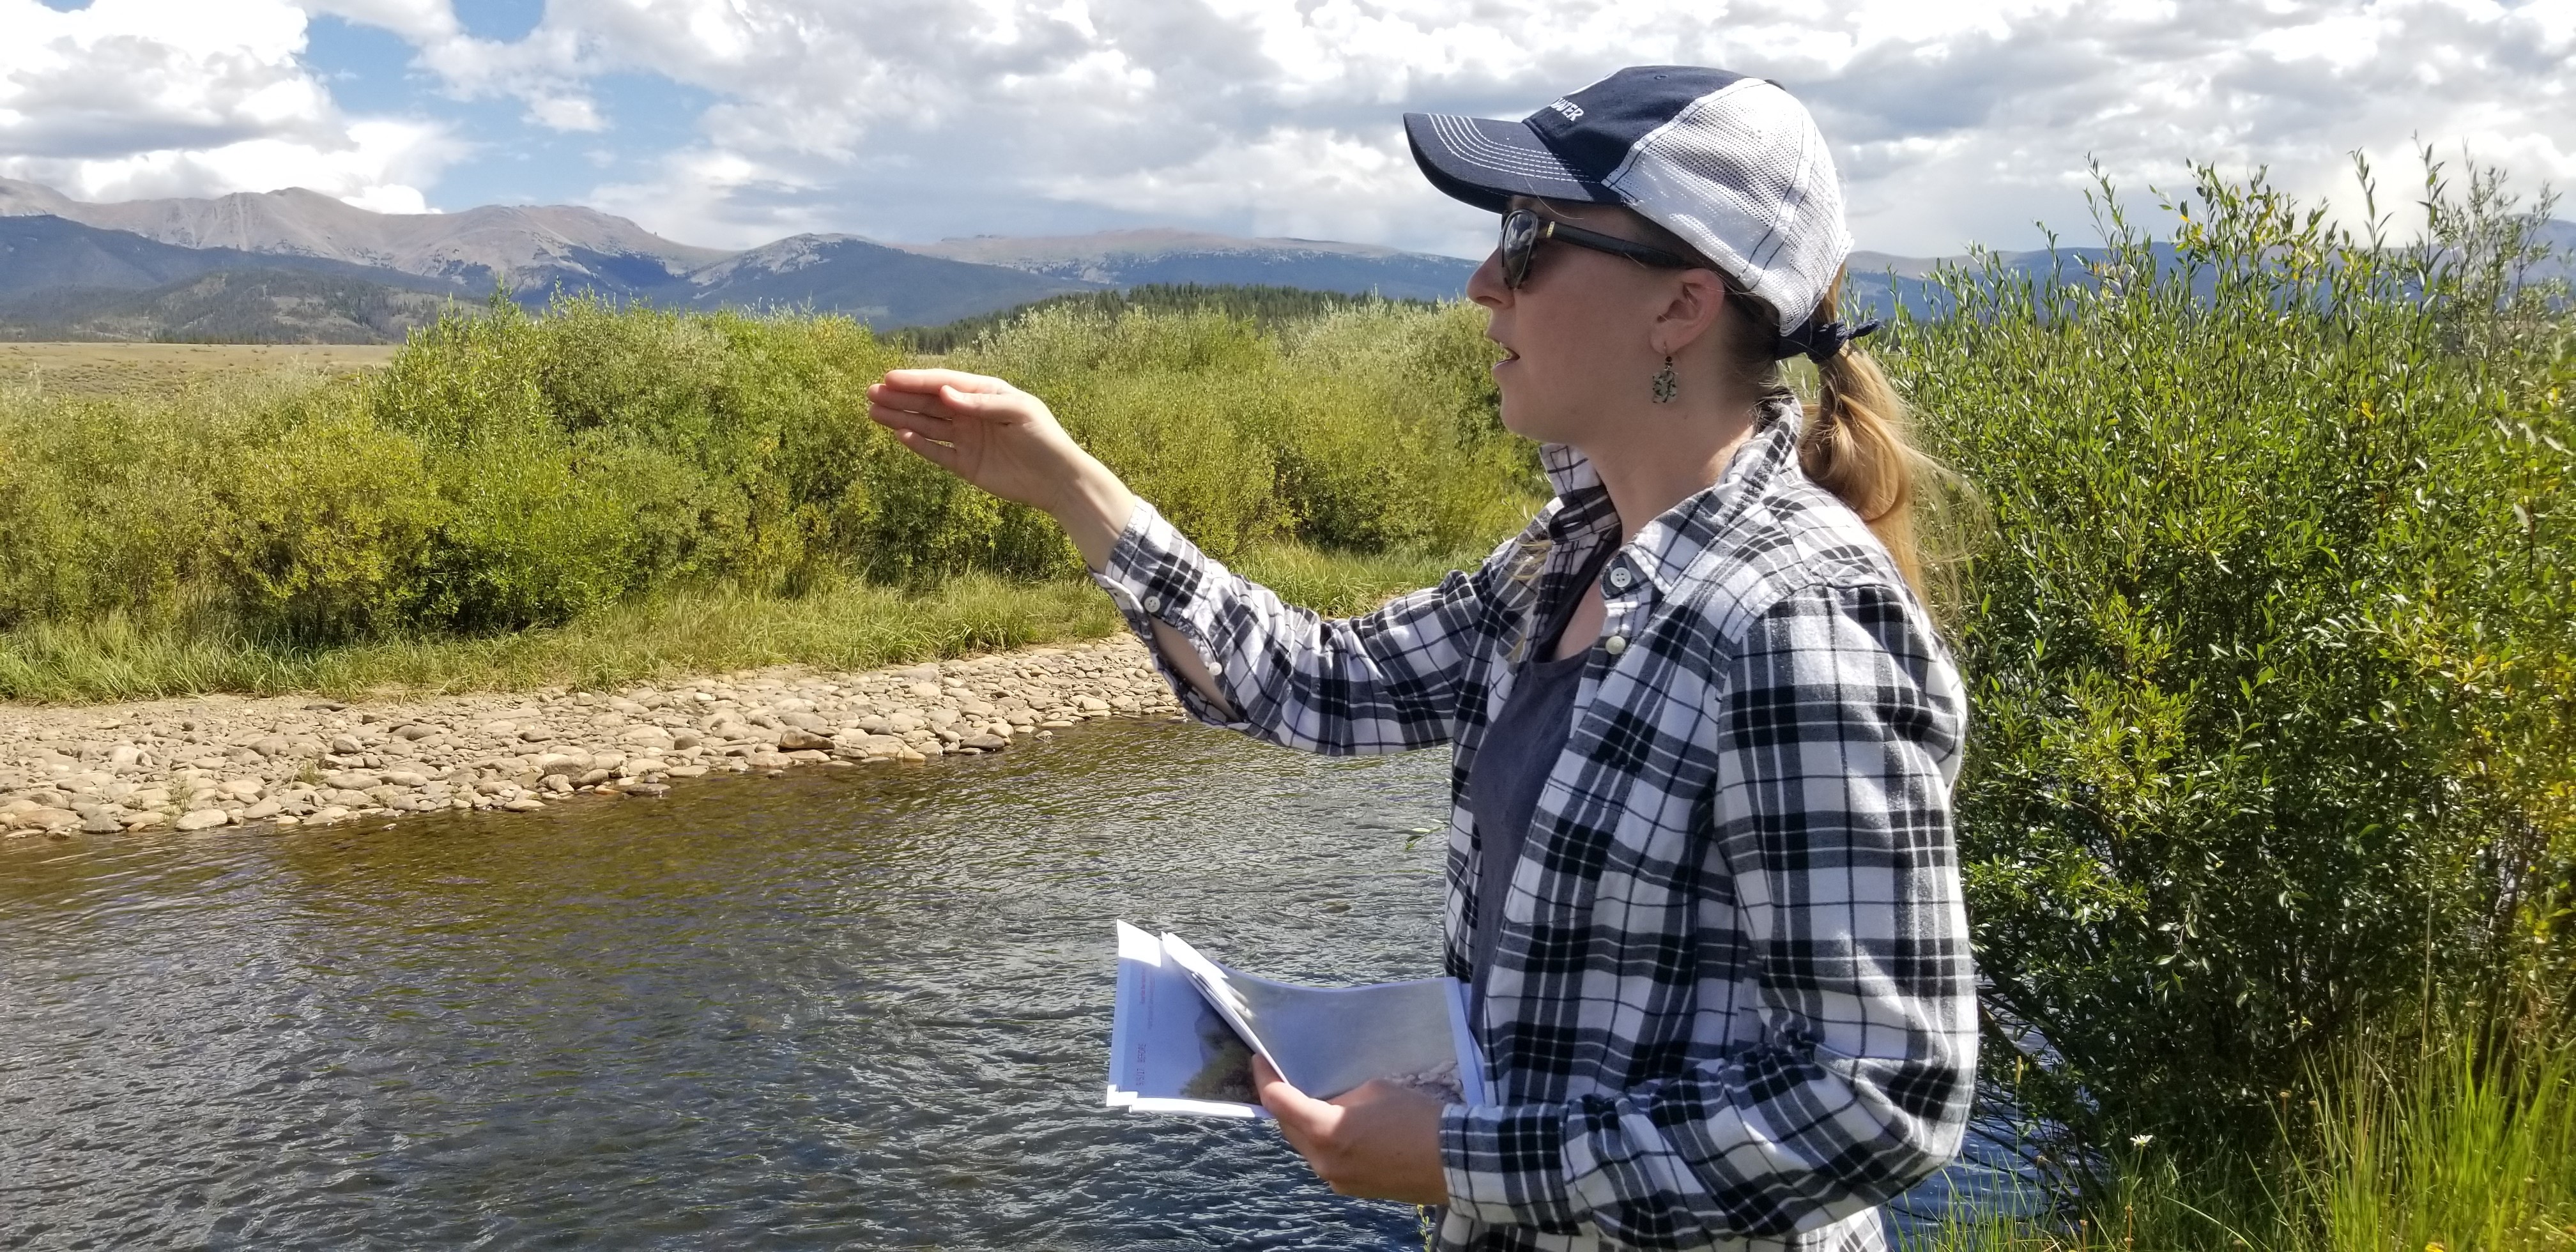 Denver Water lead environmental scientist Jessica Alexander points out improvements to the Fraser River following work in the Fraser Flats section of the river. Rock cobble on the opposite bank helps stabilize and narrow the channel, creating deeper water at low flows.